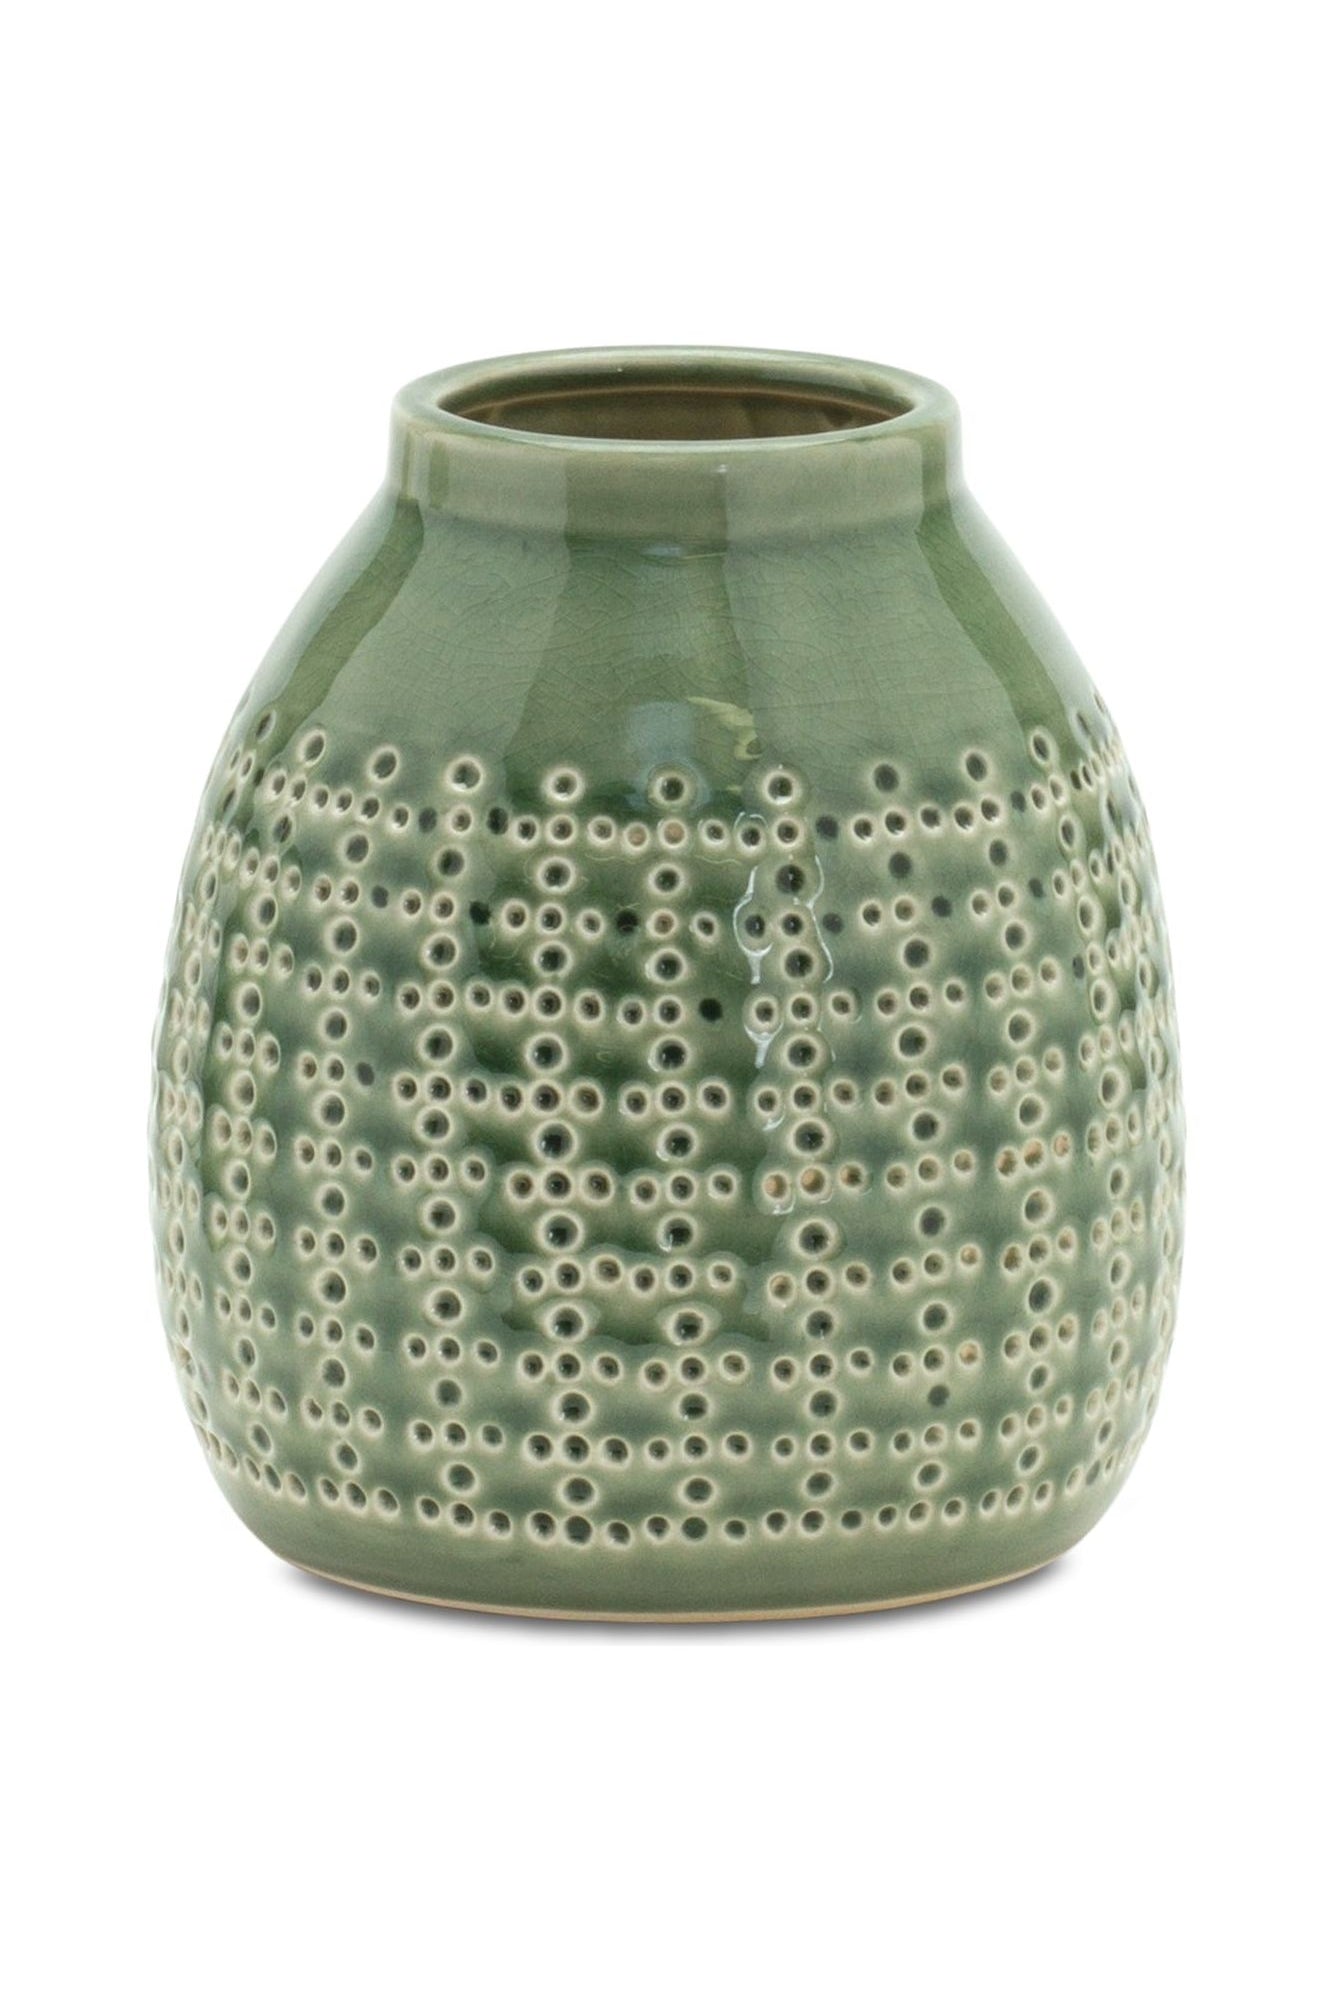 Shop For 6.5"H Green Terra Cotta Container 85242